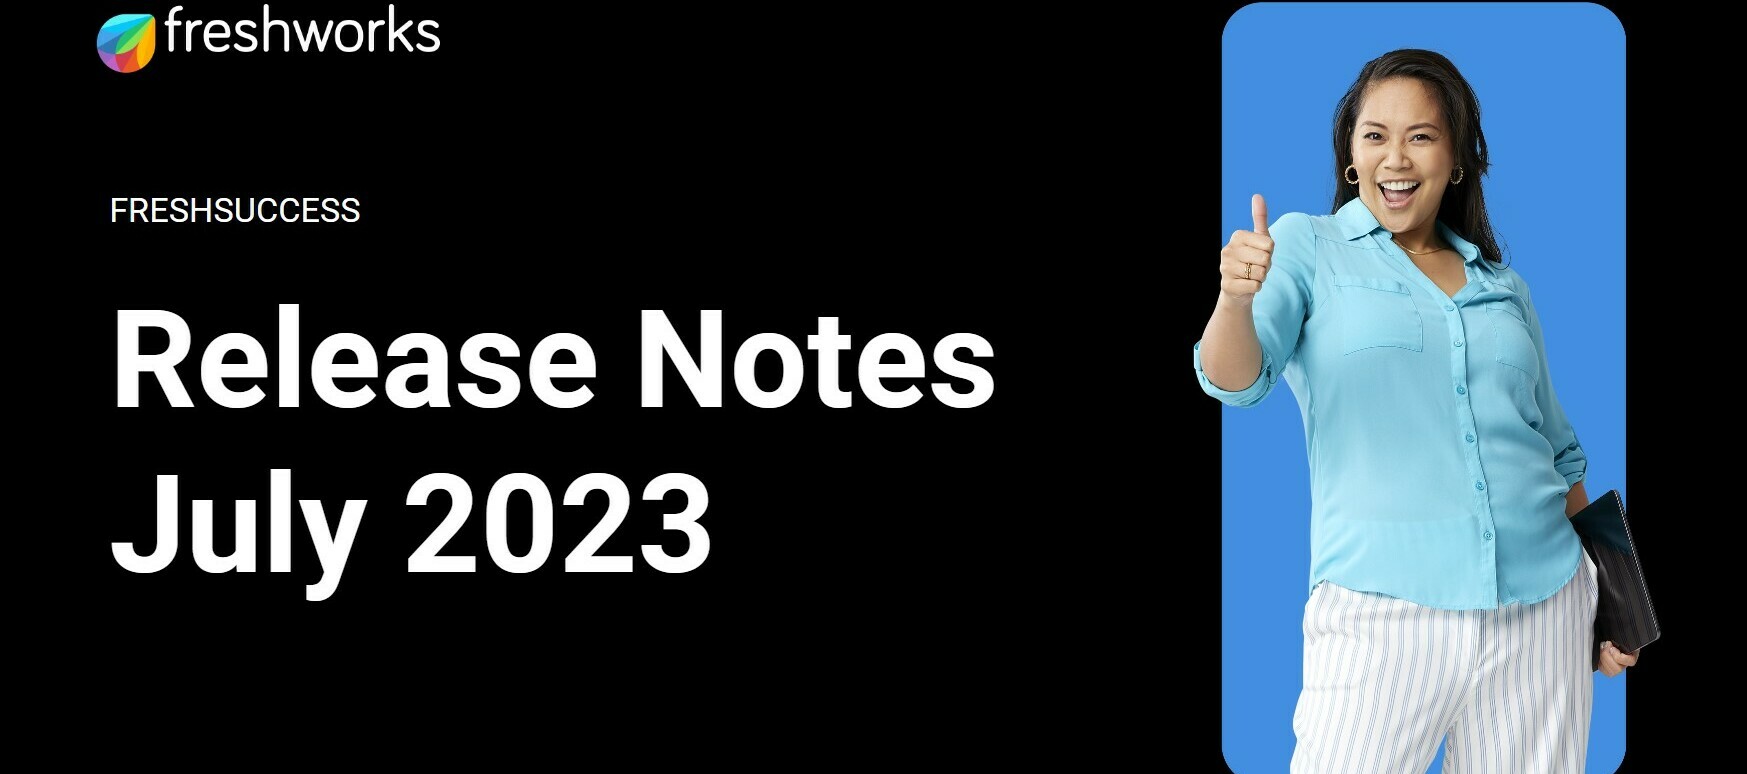 Freshsuccess Release Notes - July 2023